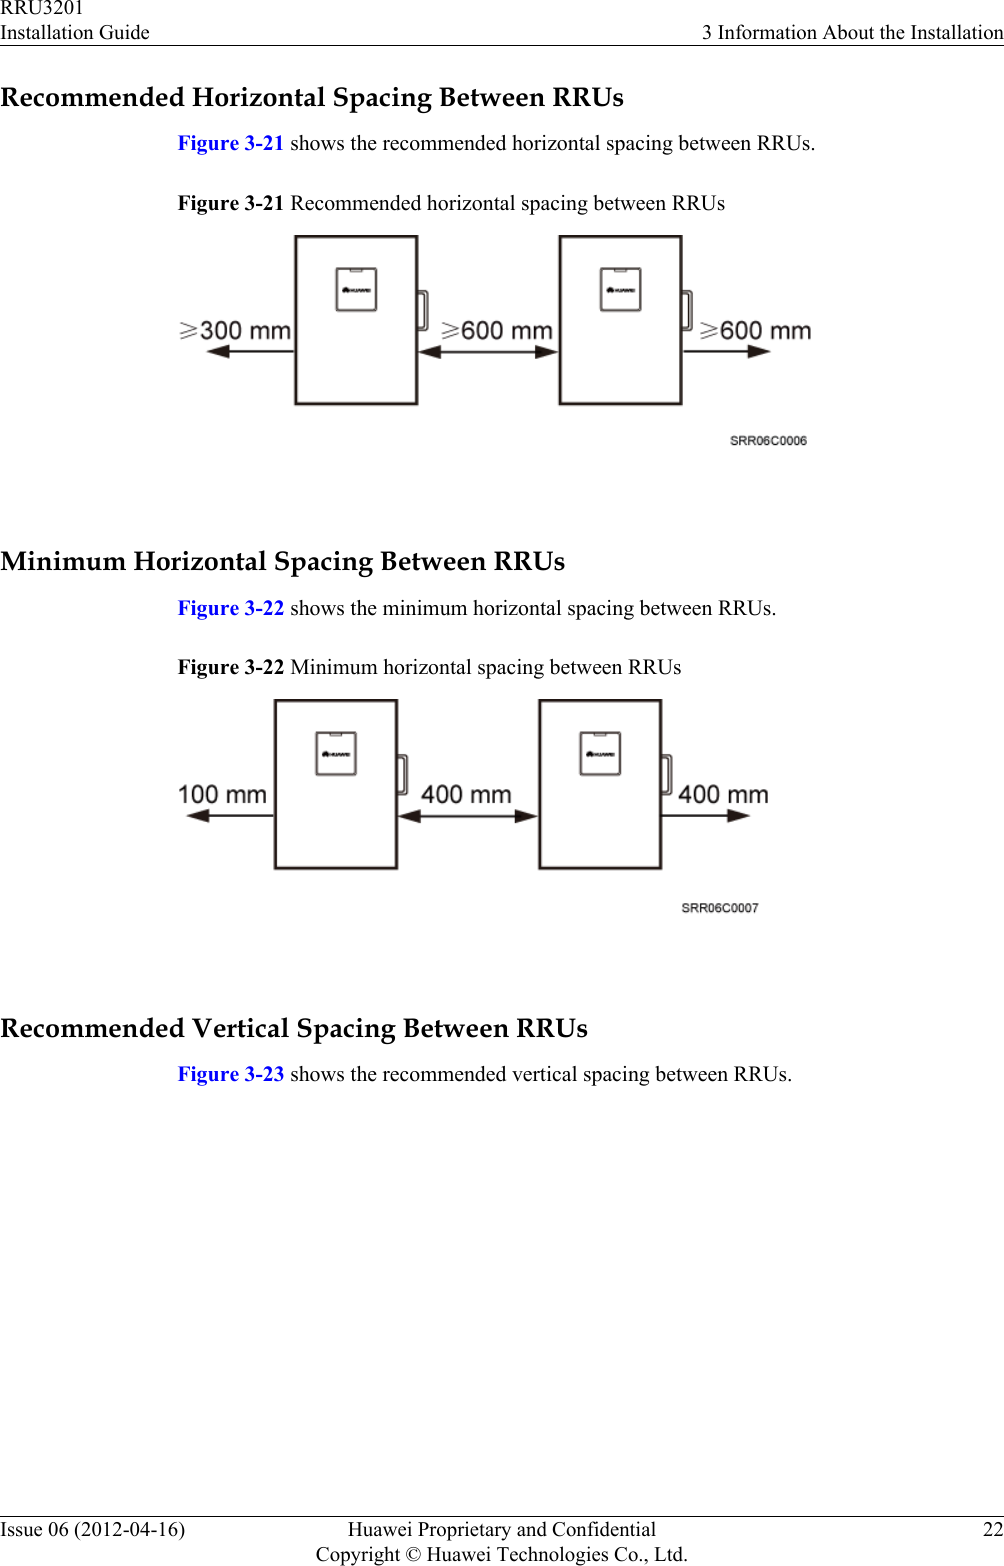 Recommended Horizontal Spacing Between RRUsFigure 3-21 shows the recommended horizontal spacing between RRUs.Figure 3-21 Recommended horizontal spacing between RRUs Minimum Horizontal Spacing Between RRUsFigure 3-22 shows the minimum horizontal spacing between RRUs.Figure 3-22 Minimum horizontal spacing between RRUs Recommended Vertical Spacing Between RRUsFigure 3-23 shows the recommended vertical spacing between RRUs.RRU3201Installation Guide 3 Information About the InstallationIssue 06 (2012-04-16) Huawei Proprietary and ConfidentialCopyright © Huawei Technologies Co., Ltd.22